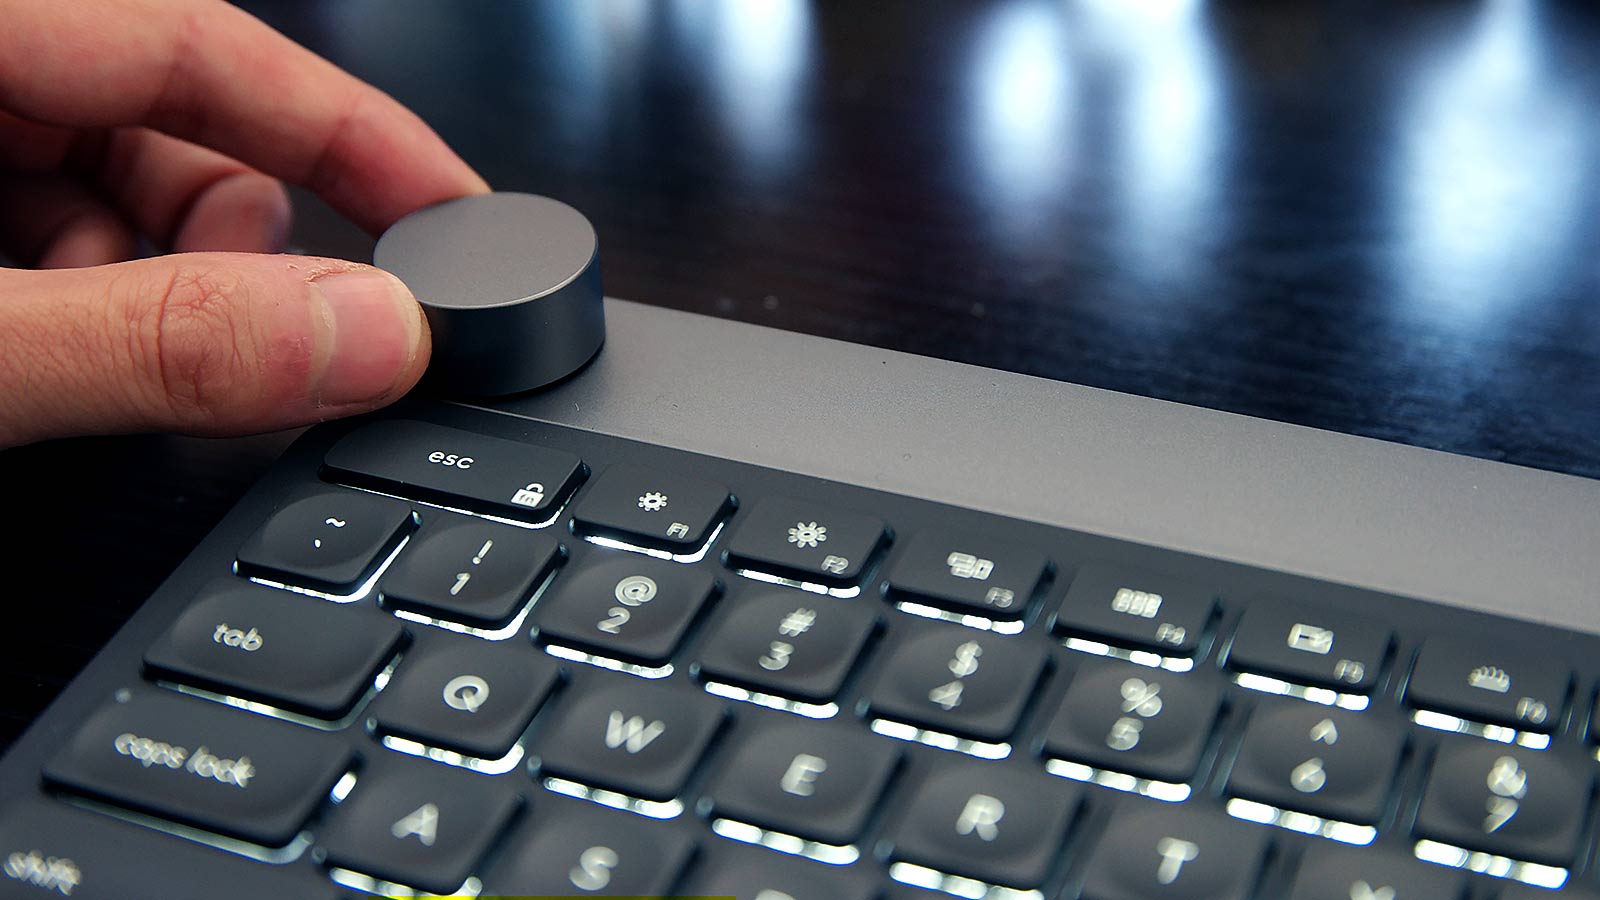 Logitech Finally Made A Keyboard Worthy Of Its Best Mouse